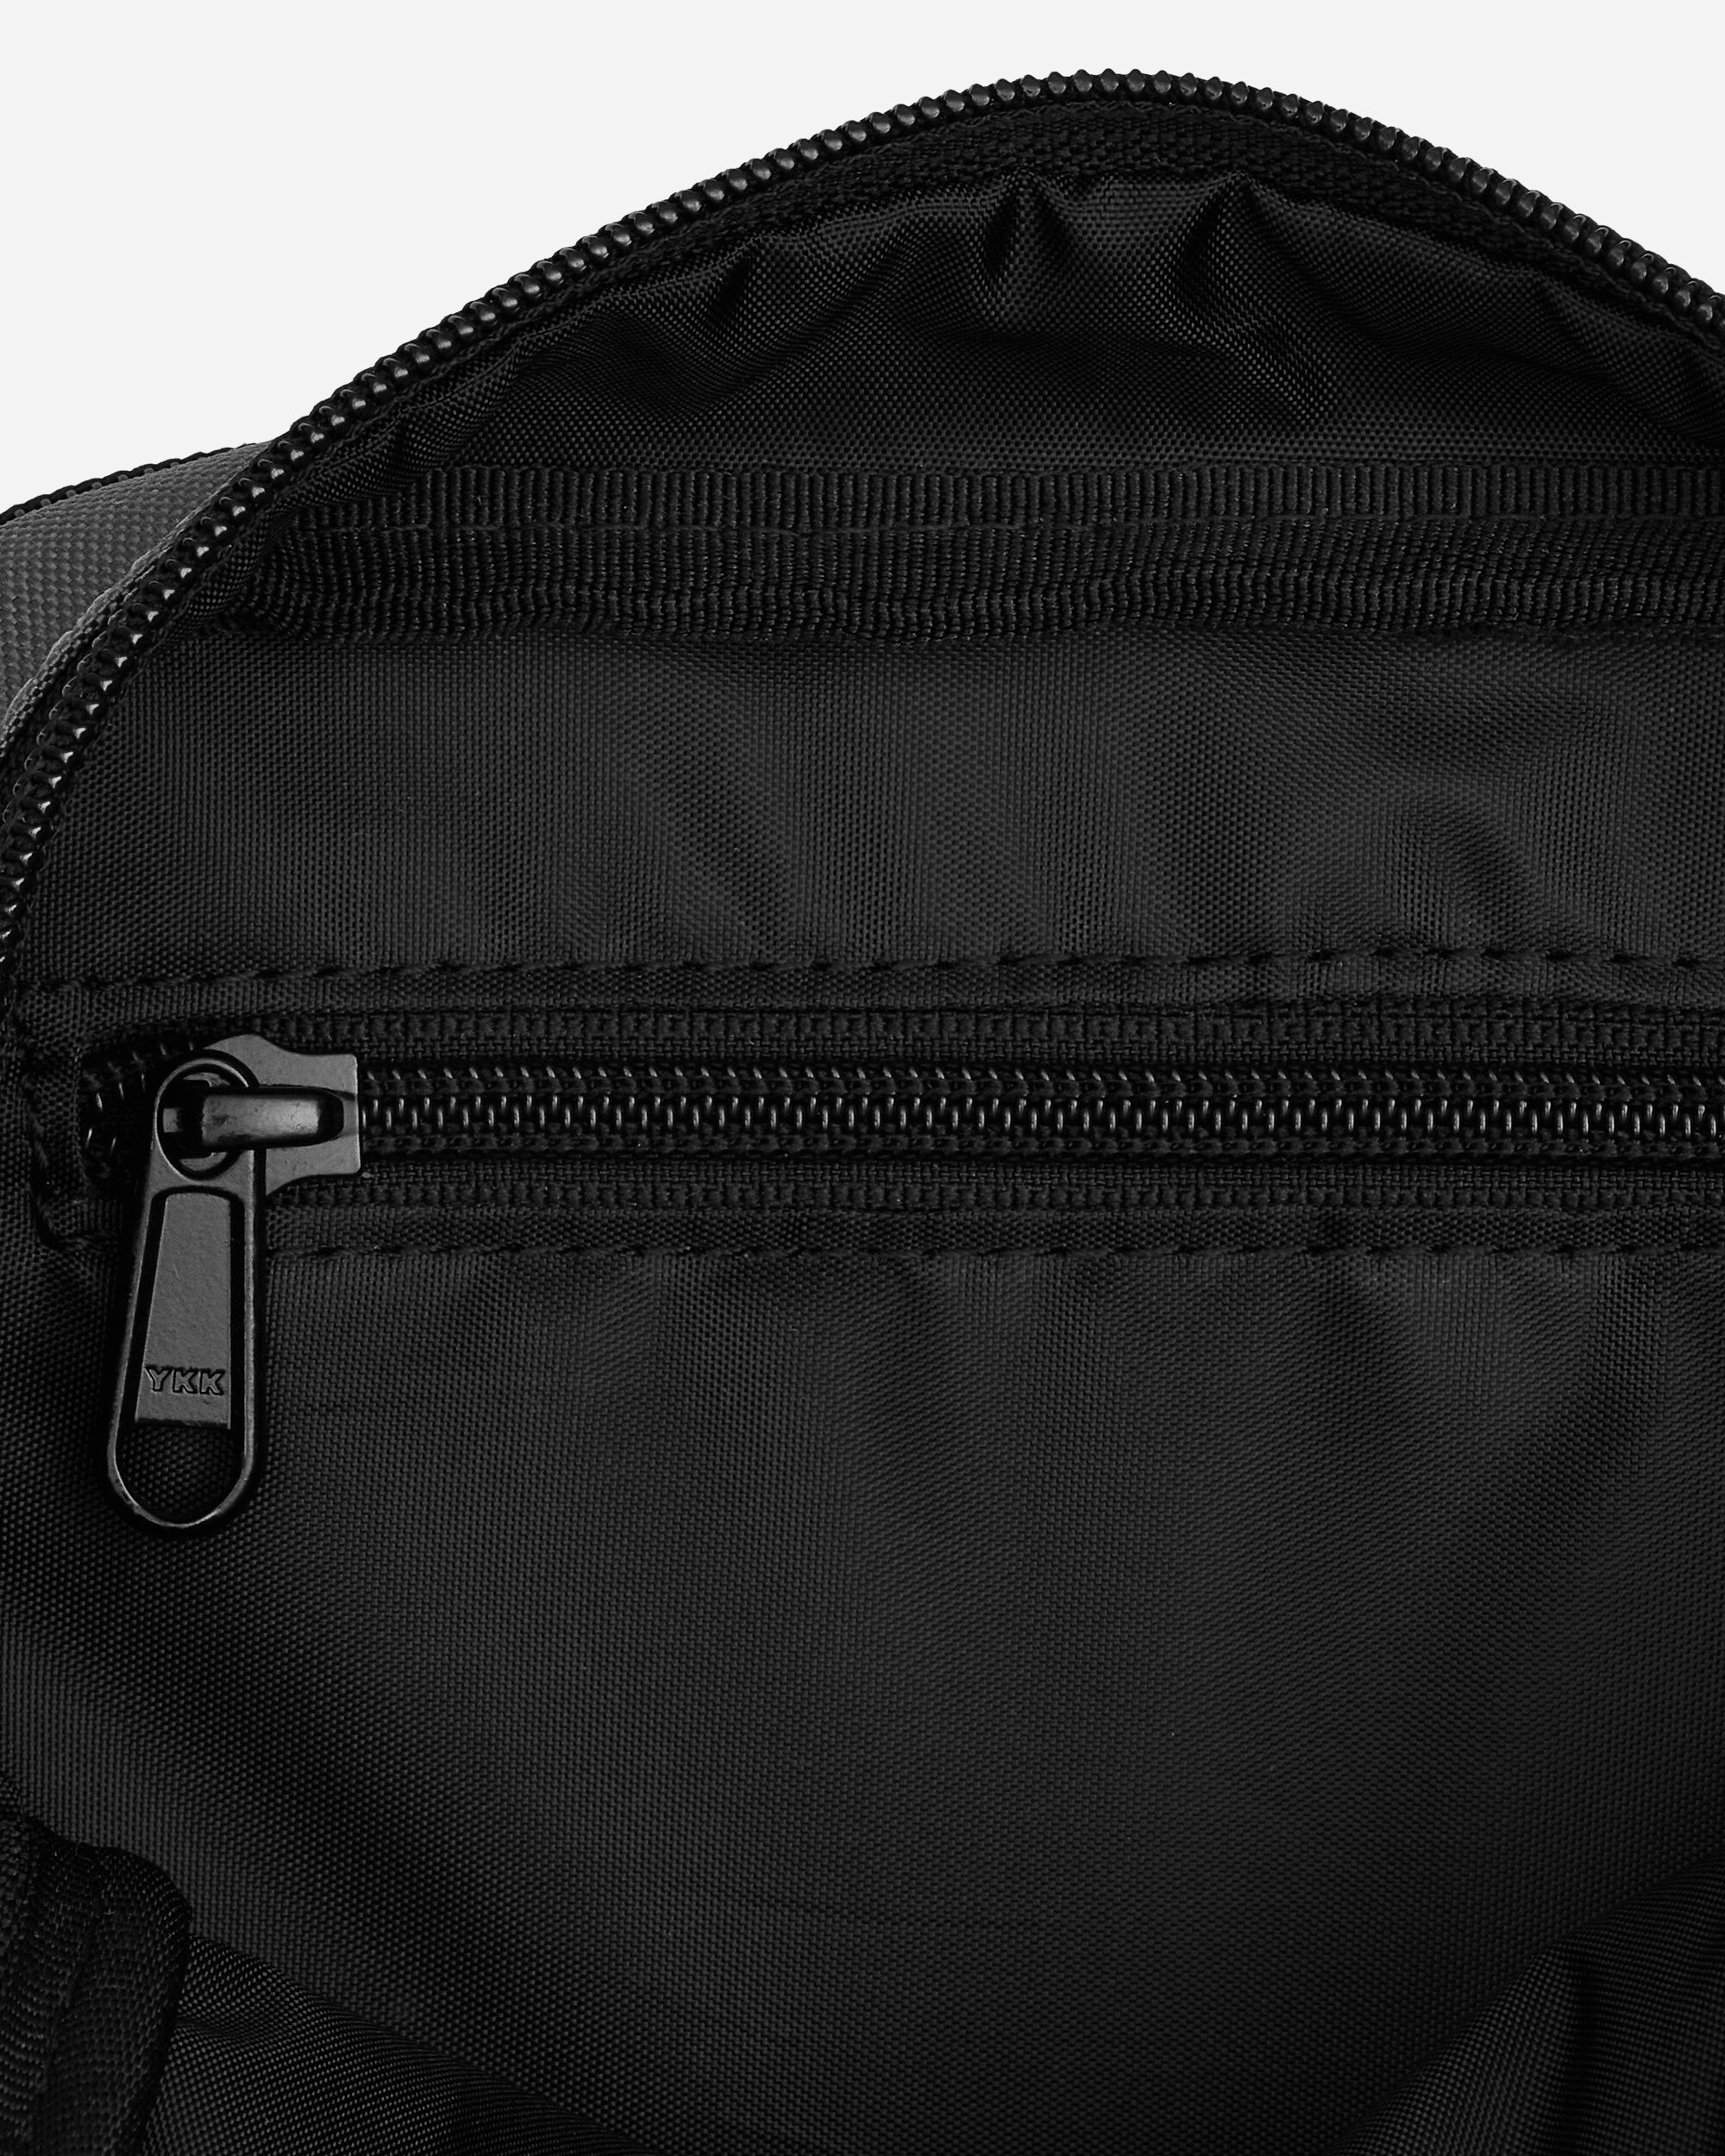 Carhartt WIP Essentials Bag, Small Black Bags and Backpacks Pouches I031470 89XX